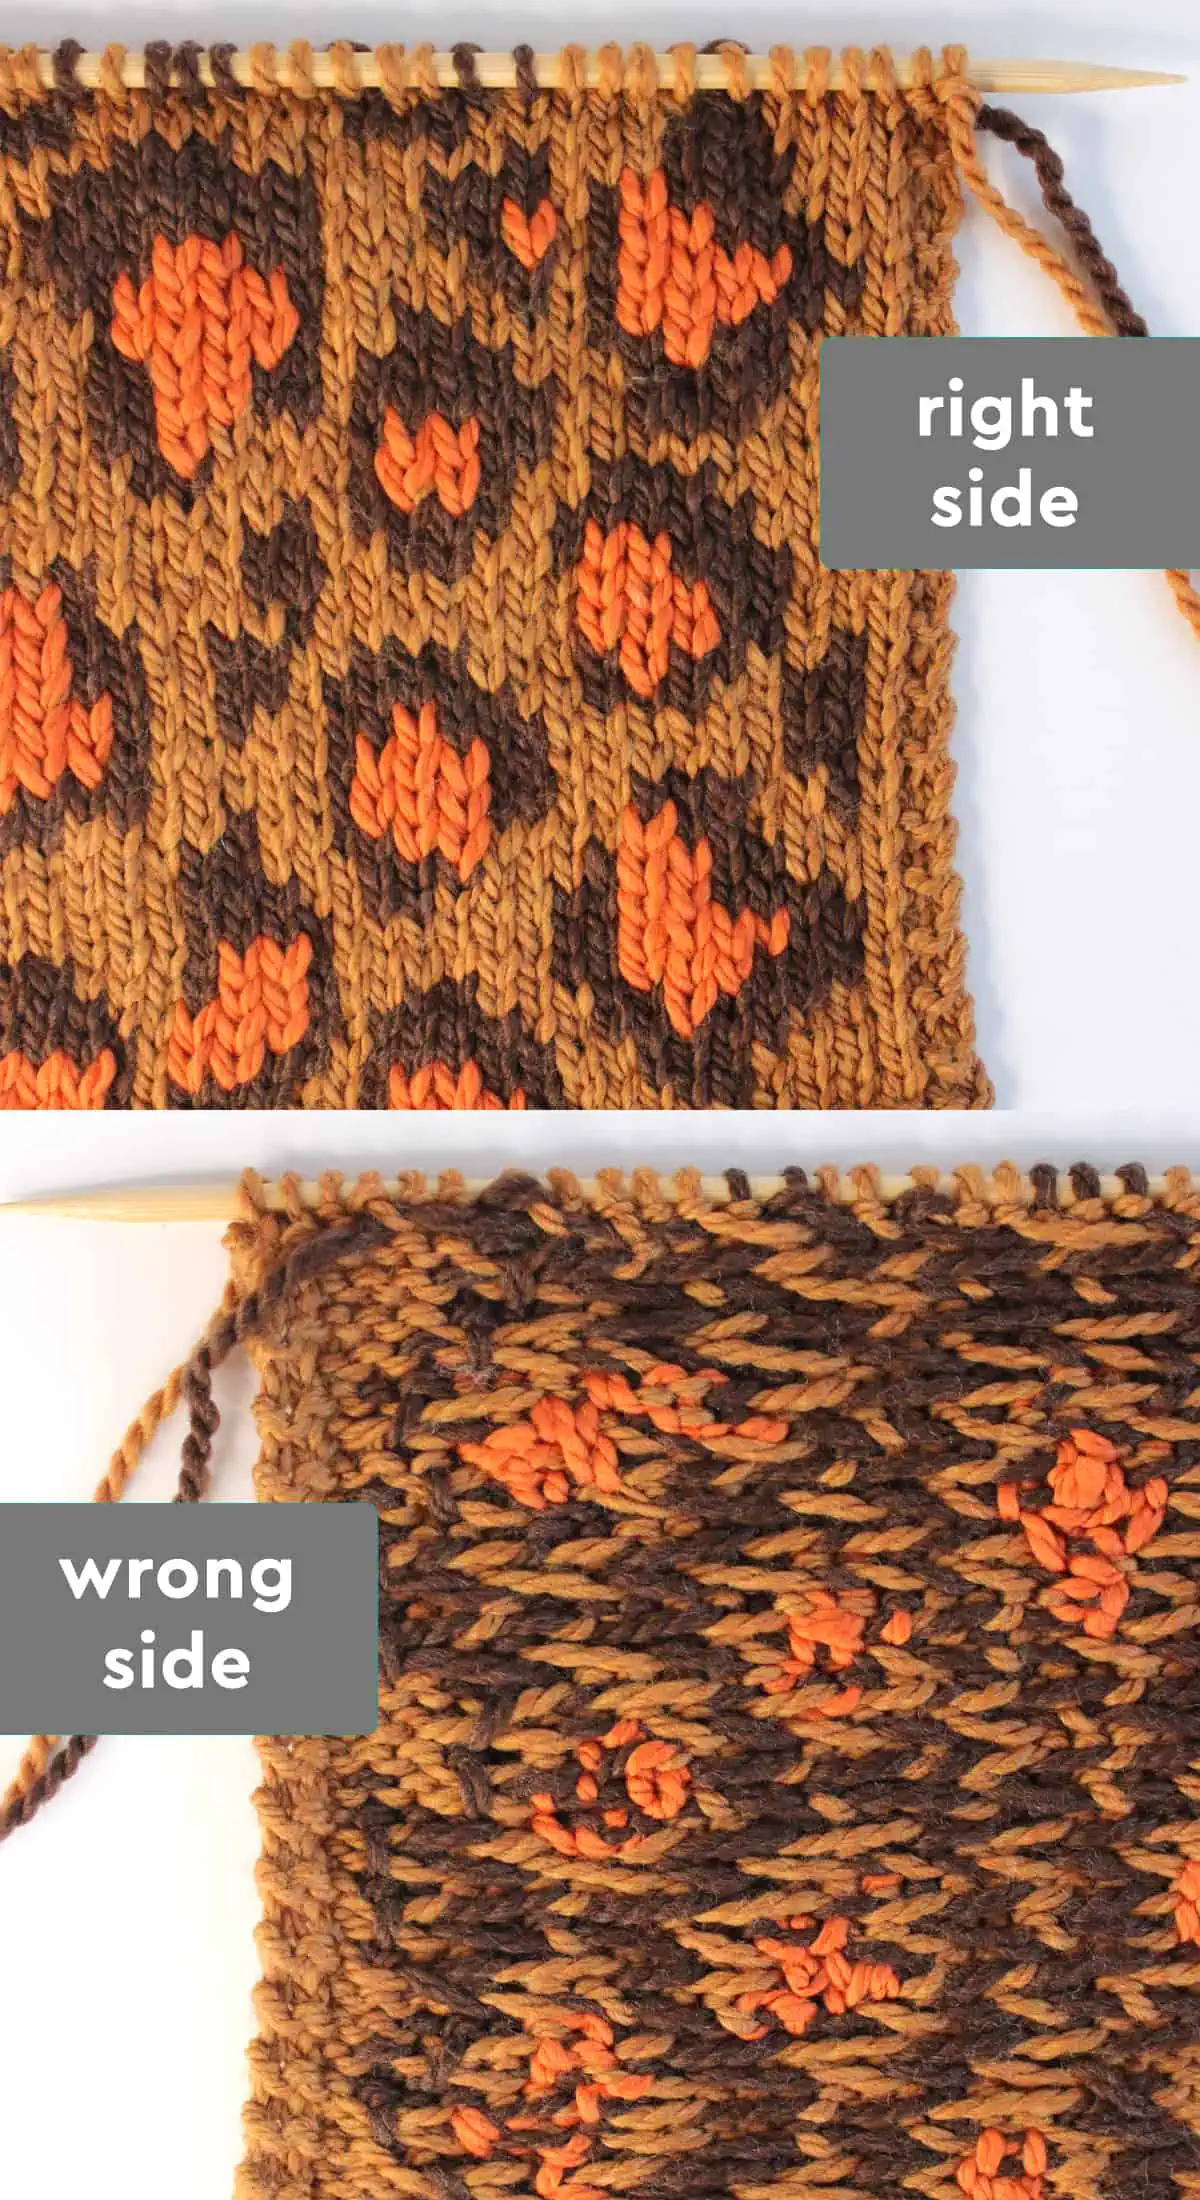 Right and wrong sides of the Leopard Print knit stitch stranded colorwork pattern in tan, dark brown, and orange colored yarn.